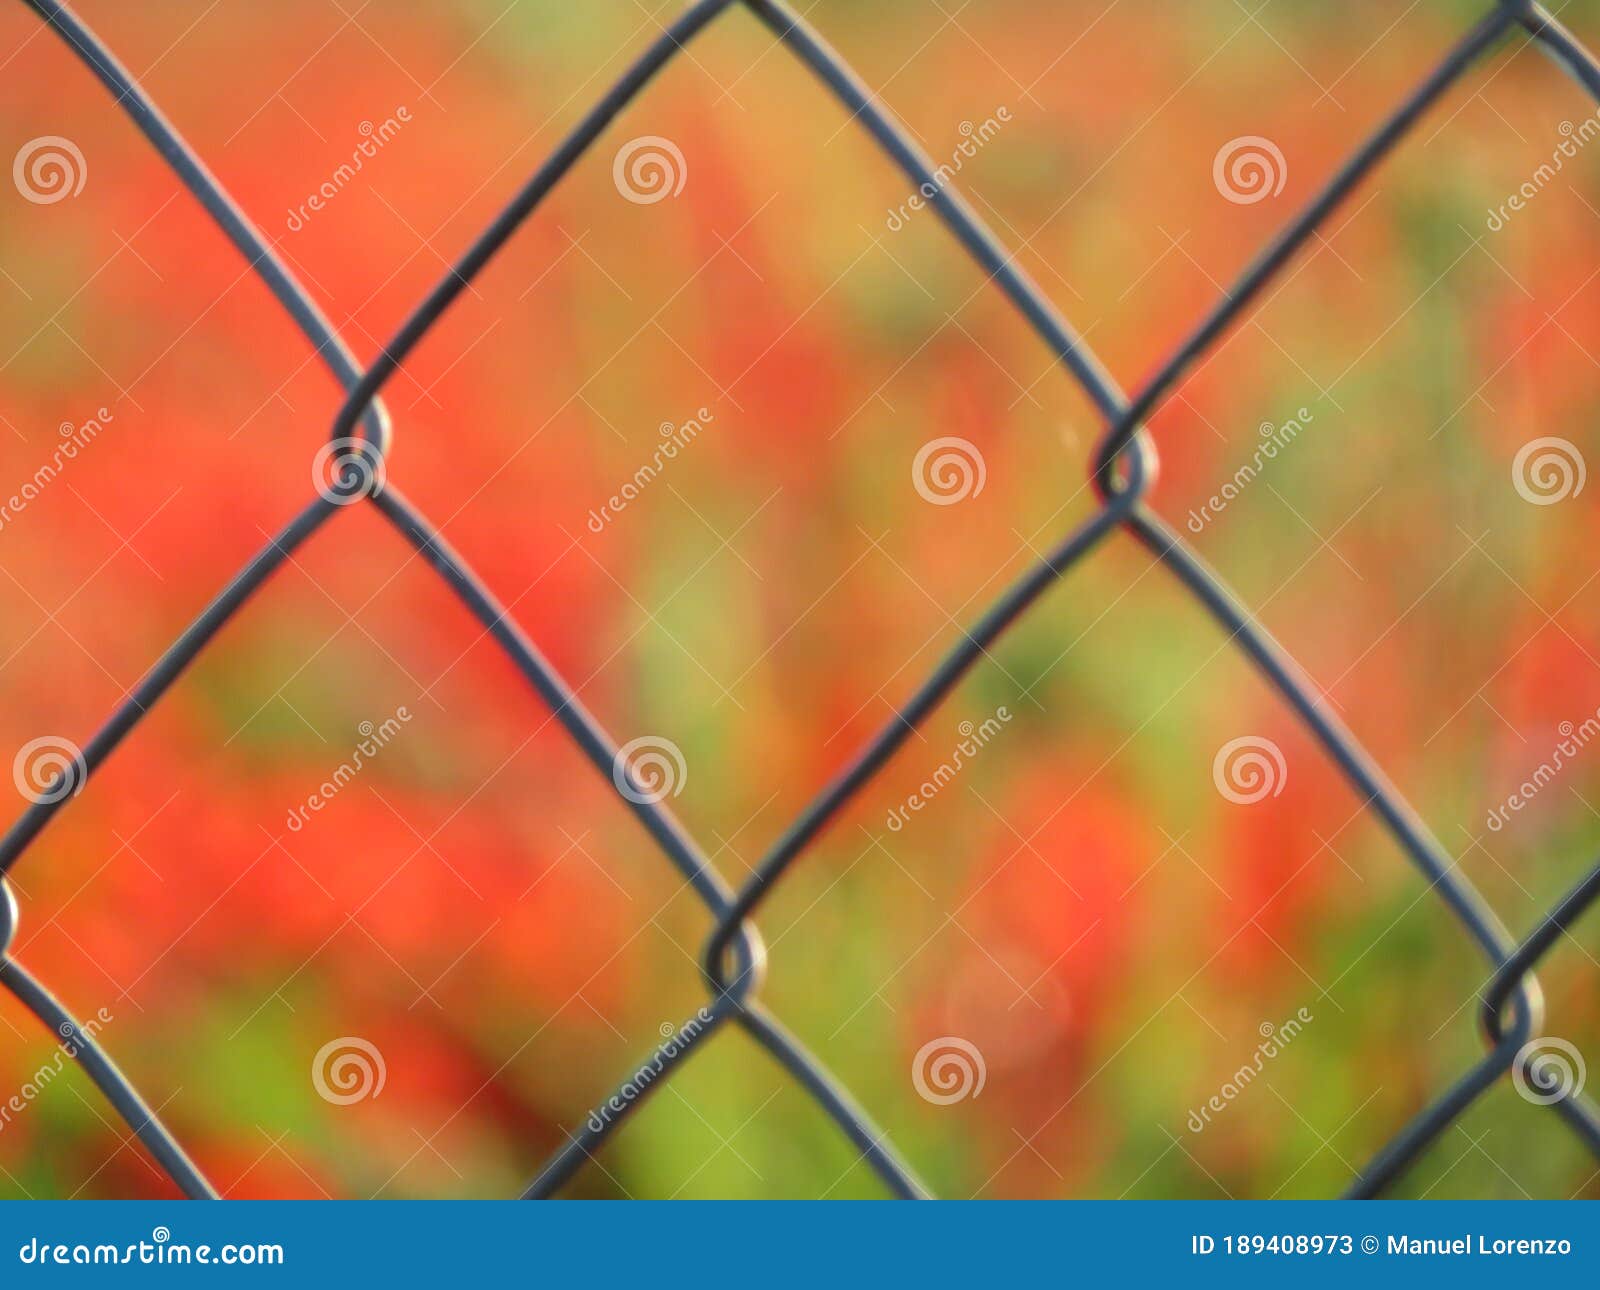 fence fence fence enclosure protection wire particular separation